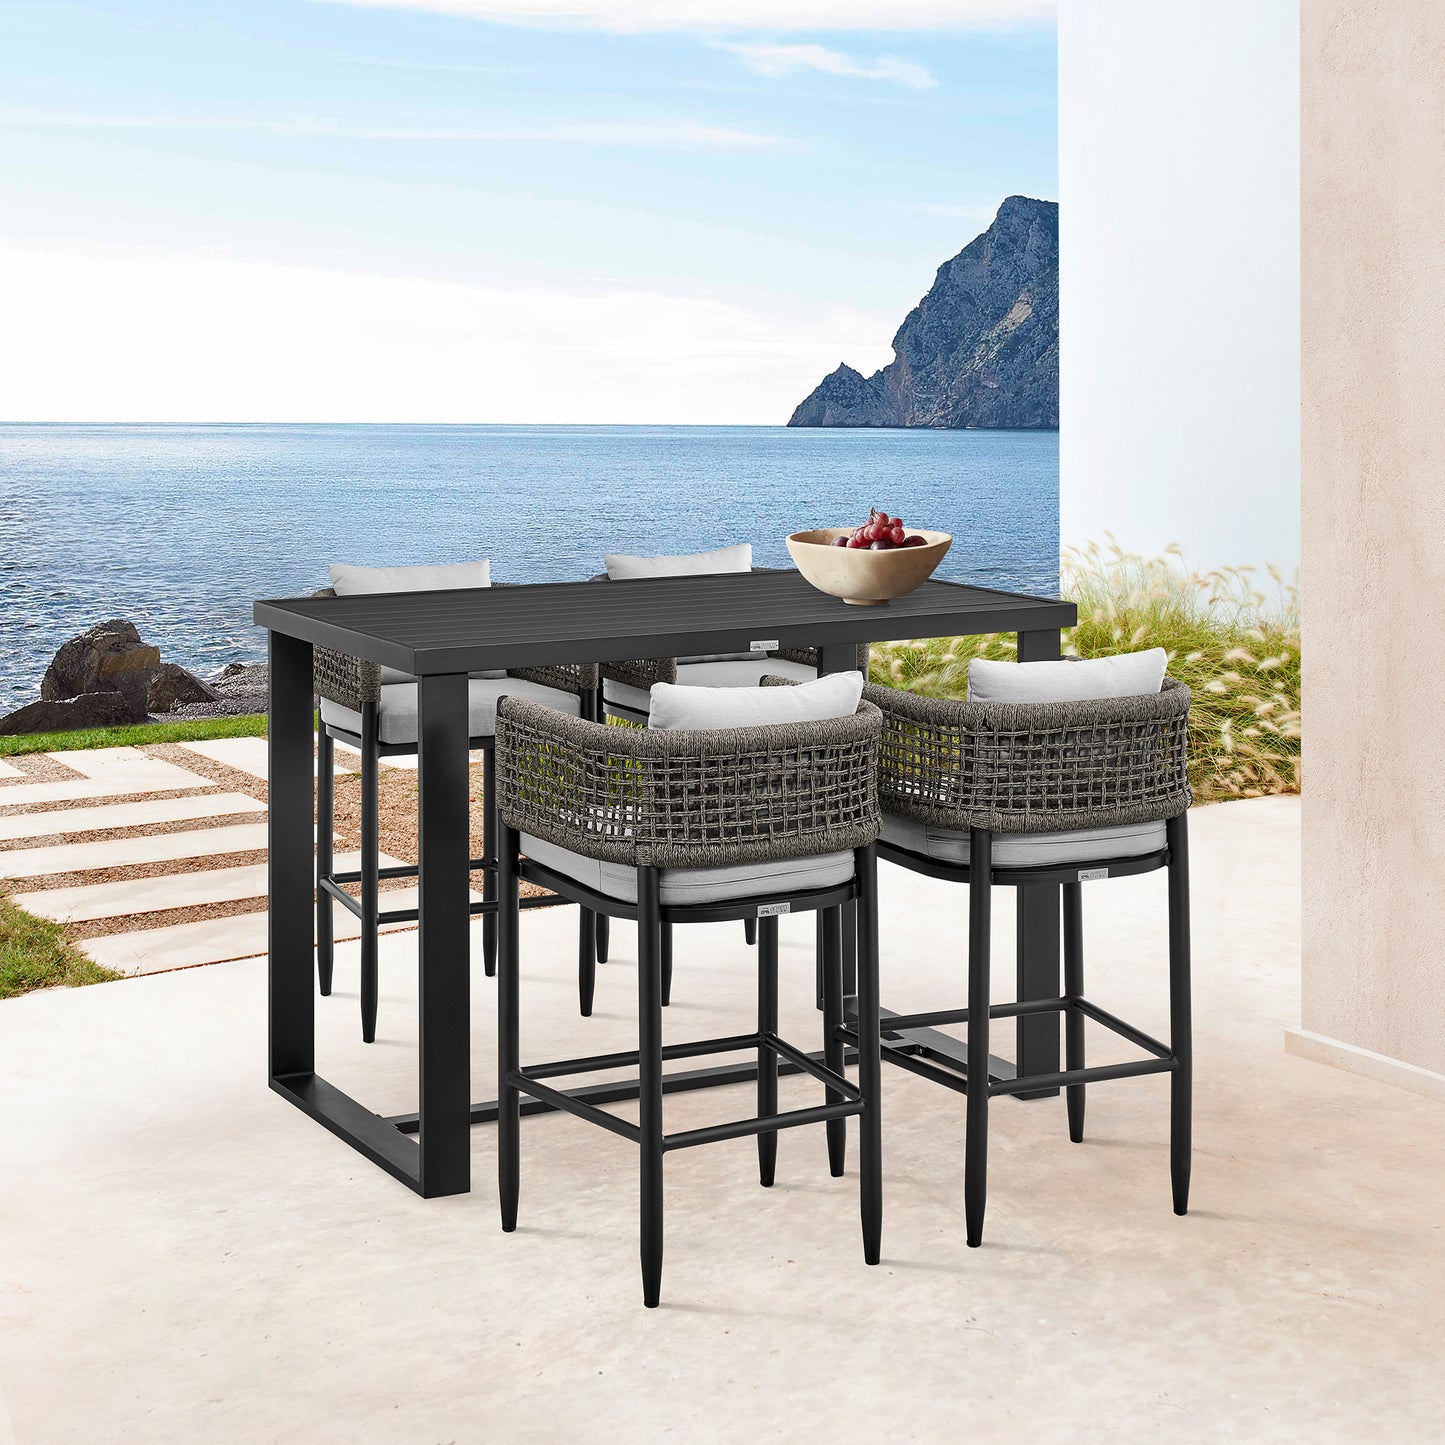 Alegria Outdoor Patio Bar Height Dining Table in Aluminum